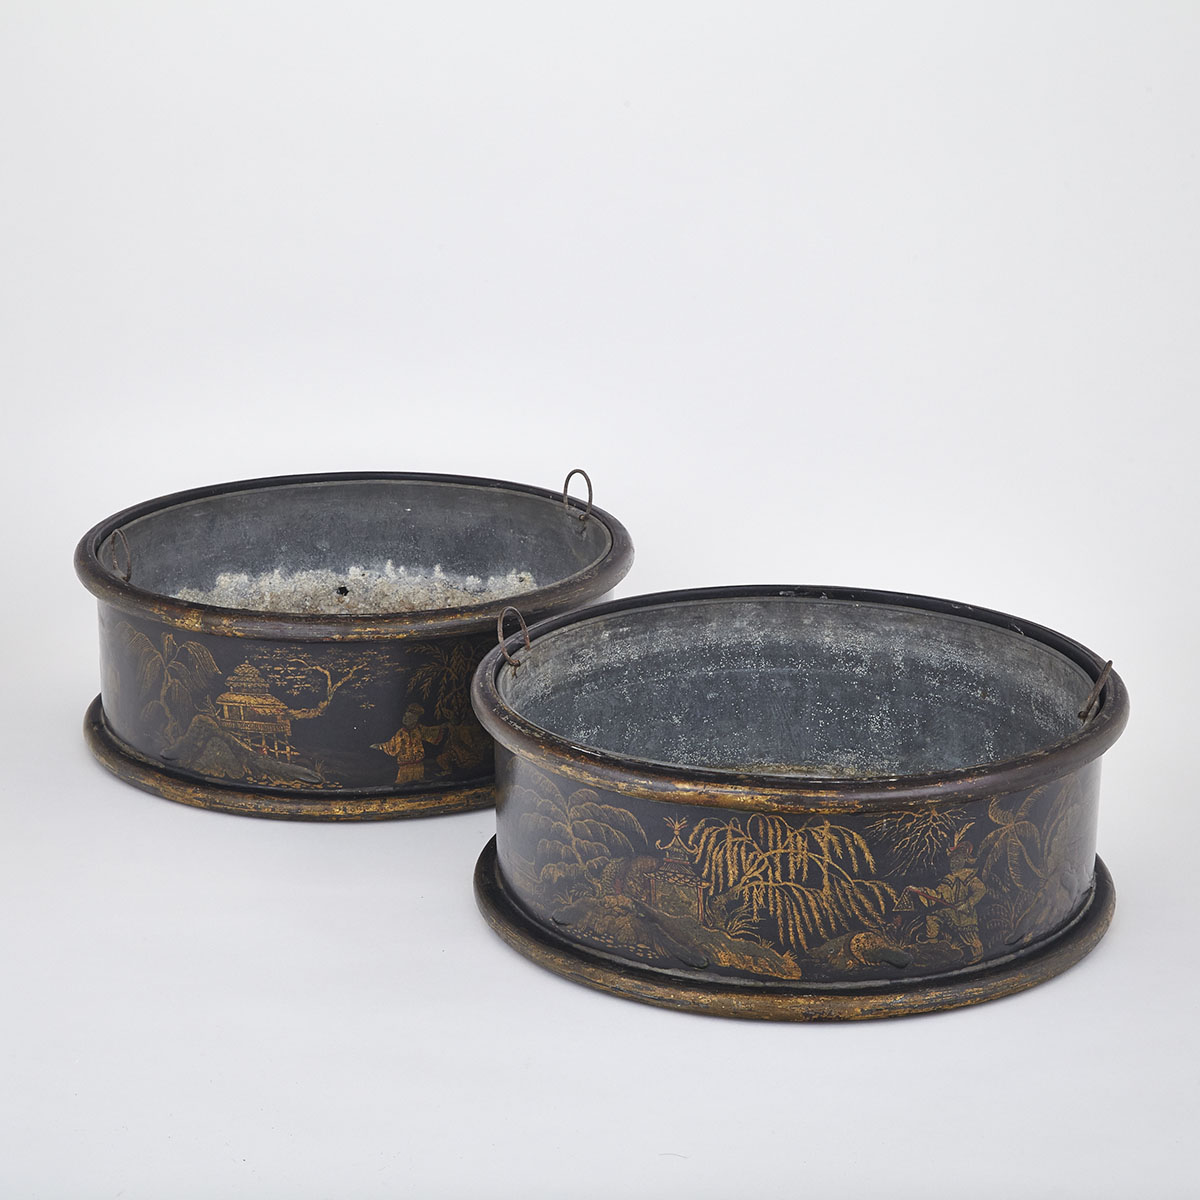 Pair of English Japanned Low Jardinieres, Sutcliffe & Co., Manchester, mid 19th century